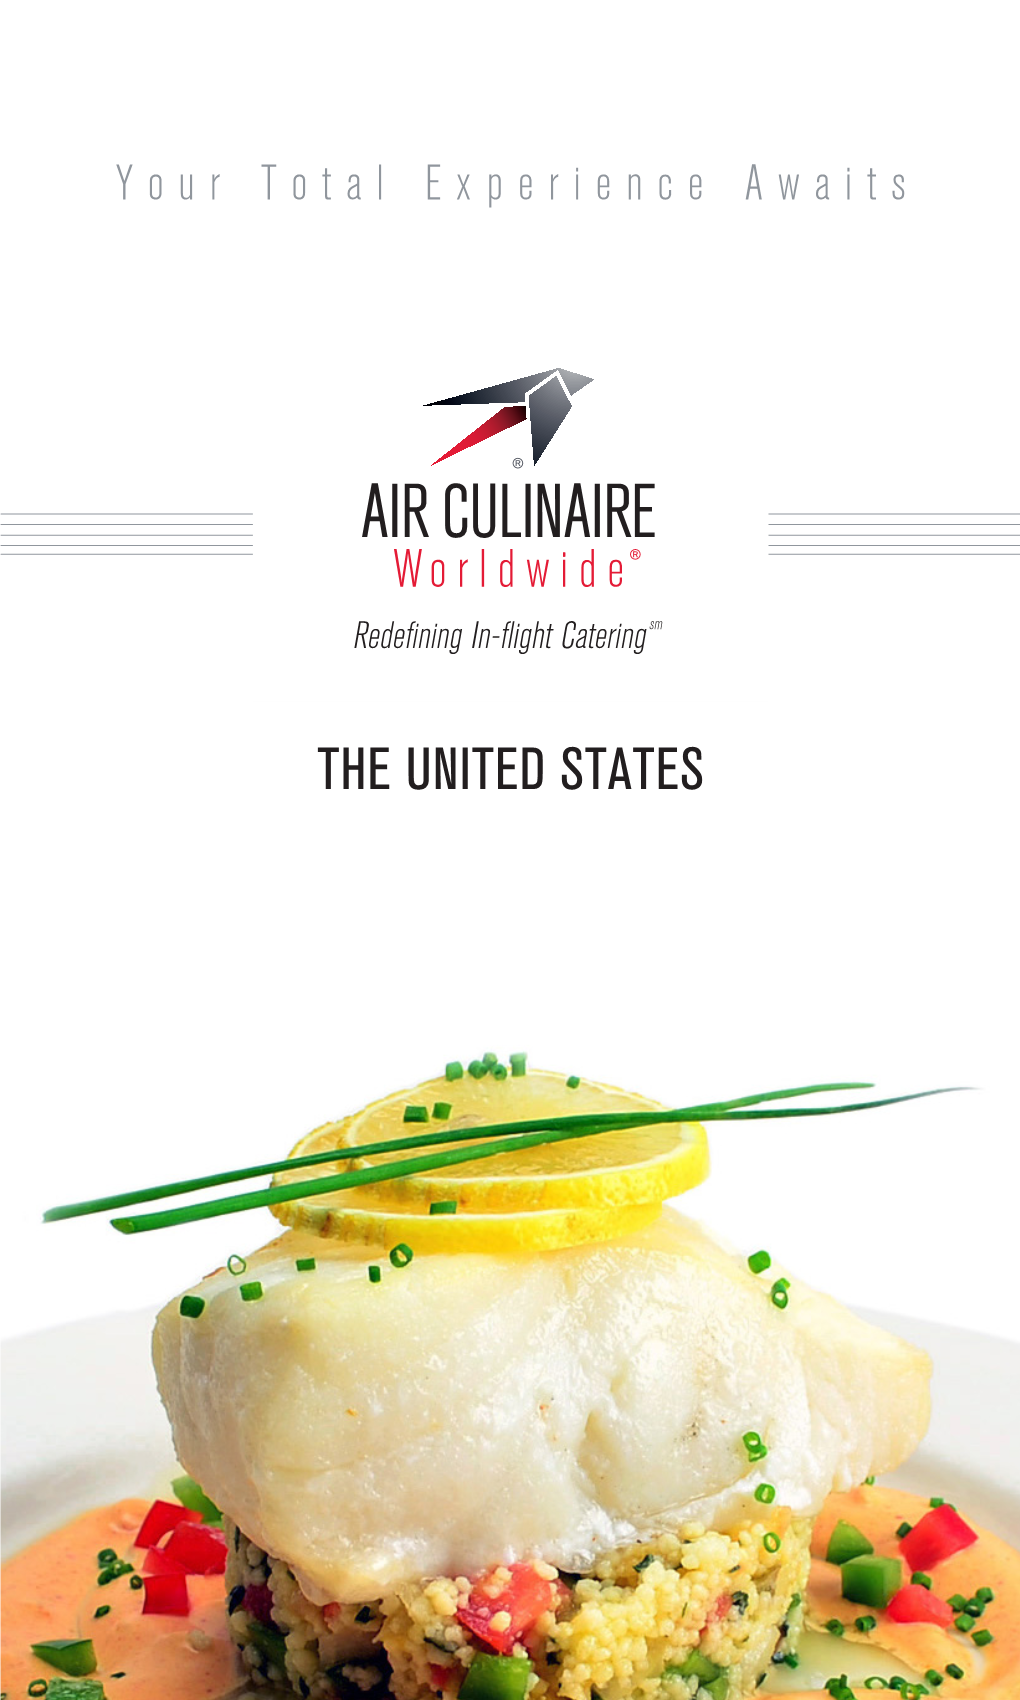 THE UNITED STATES ACW Pref a Vert 4CP (Vert Tag) “Air Culinaire Worldwide Is Redefining Business Aviation Catering Globally